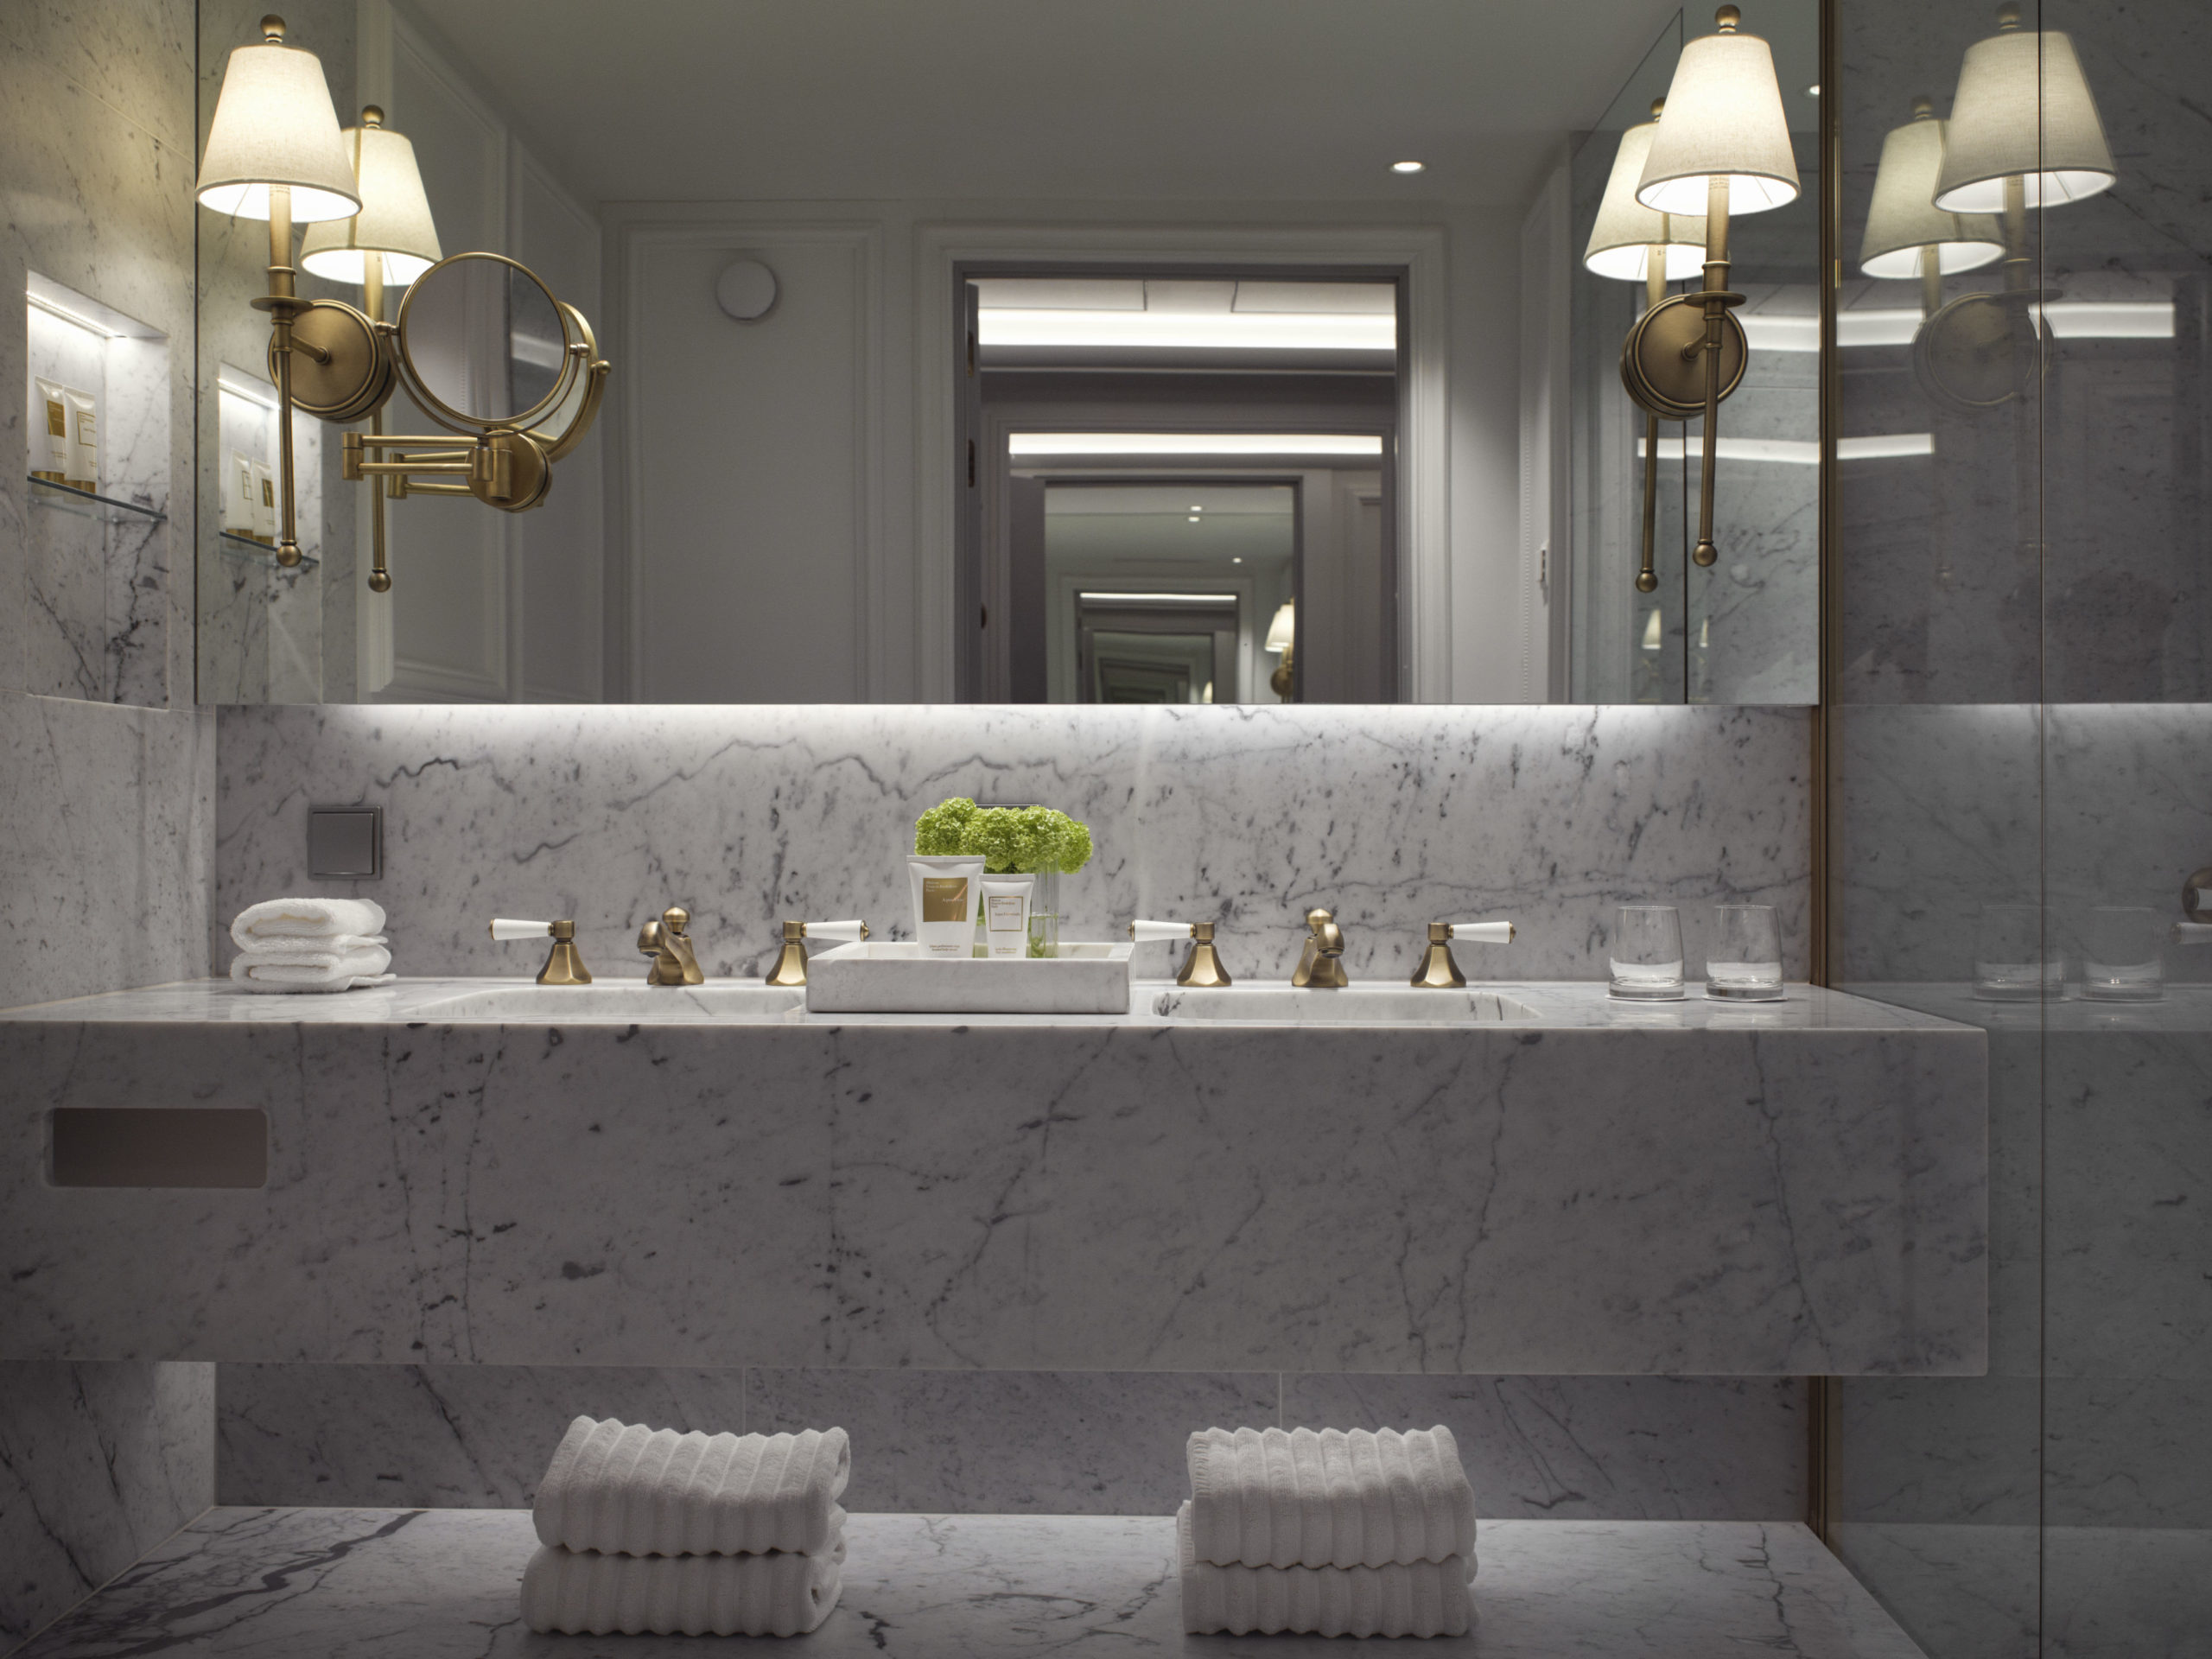 Carrara marble bathroom with white and gold interior details